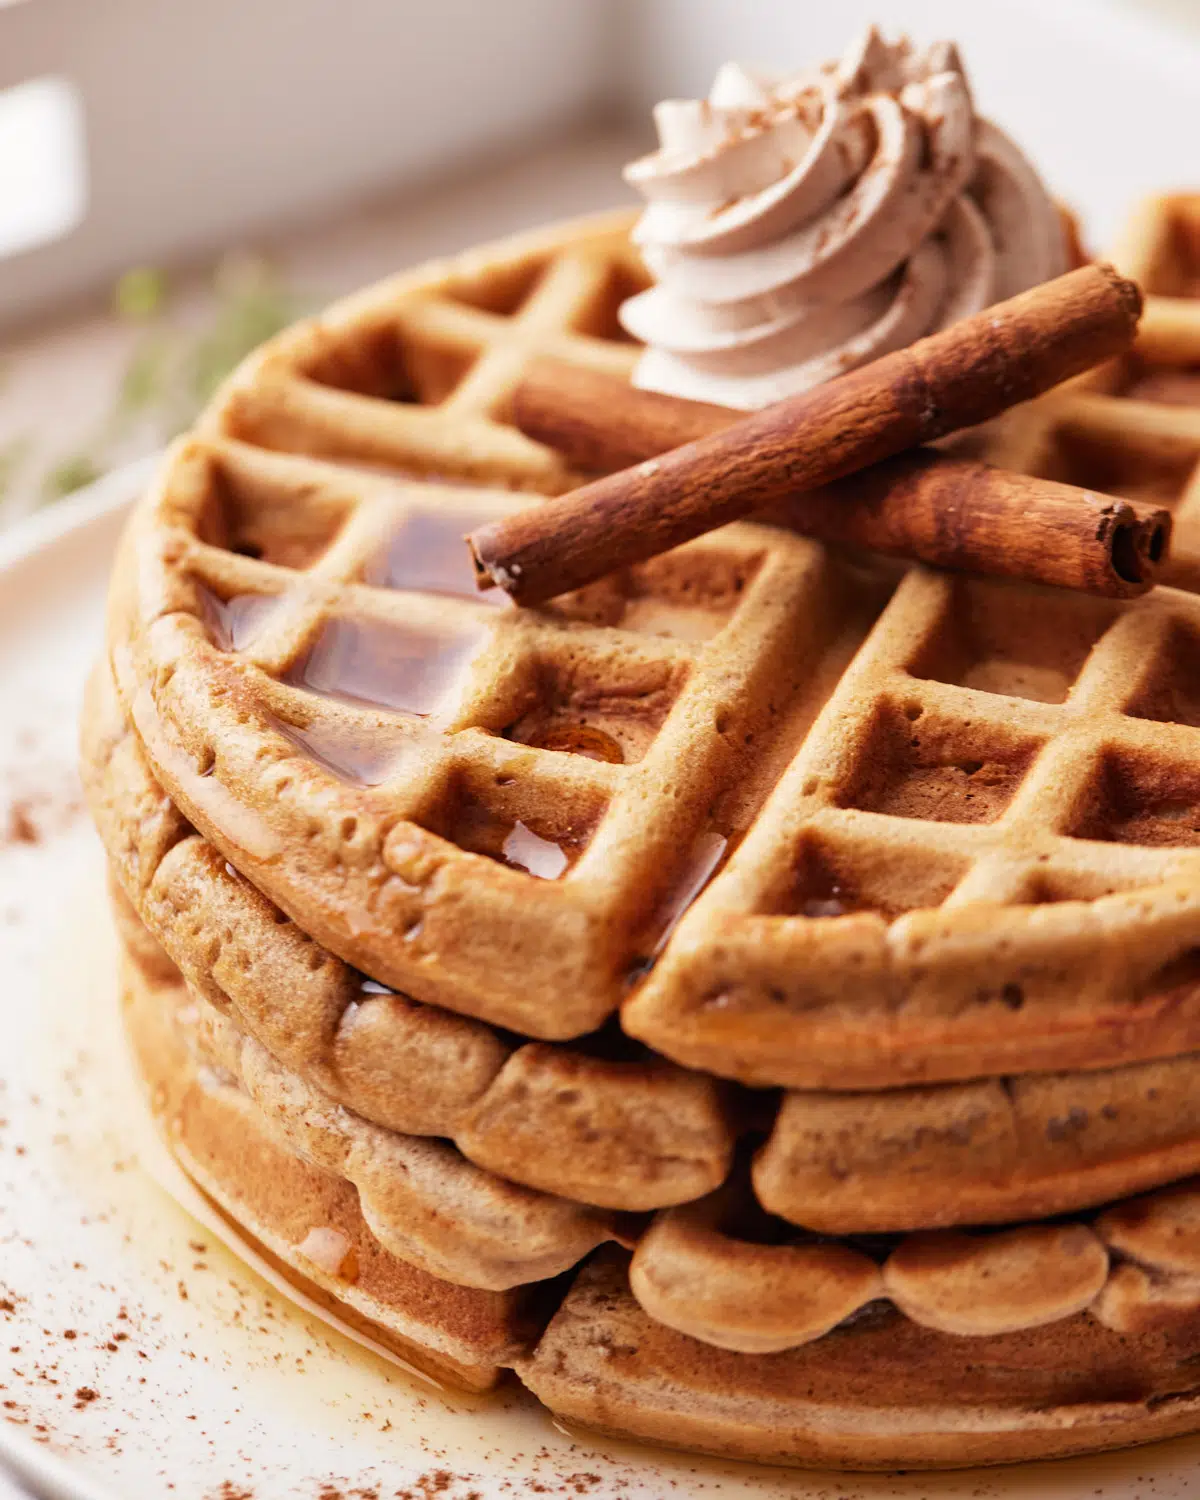 cinnamon whipped cream and maple syrup on top of cinnamon waffles.